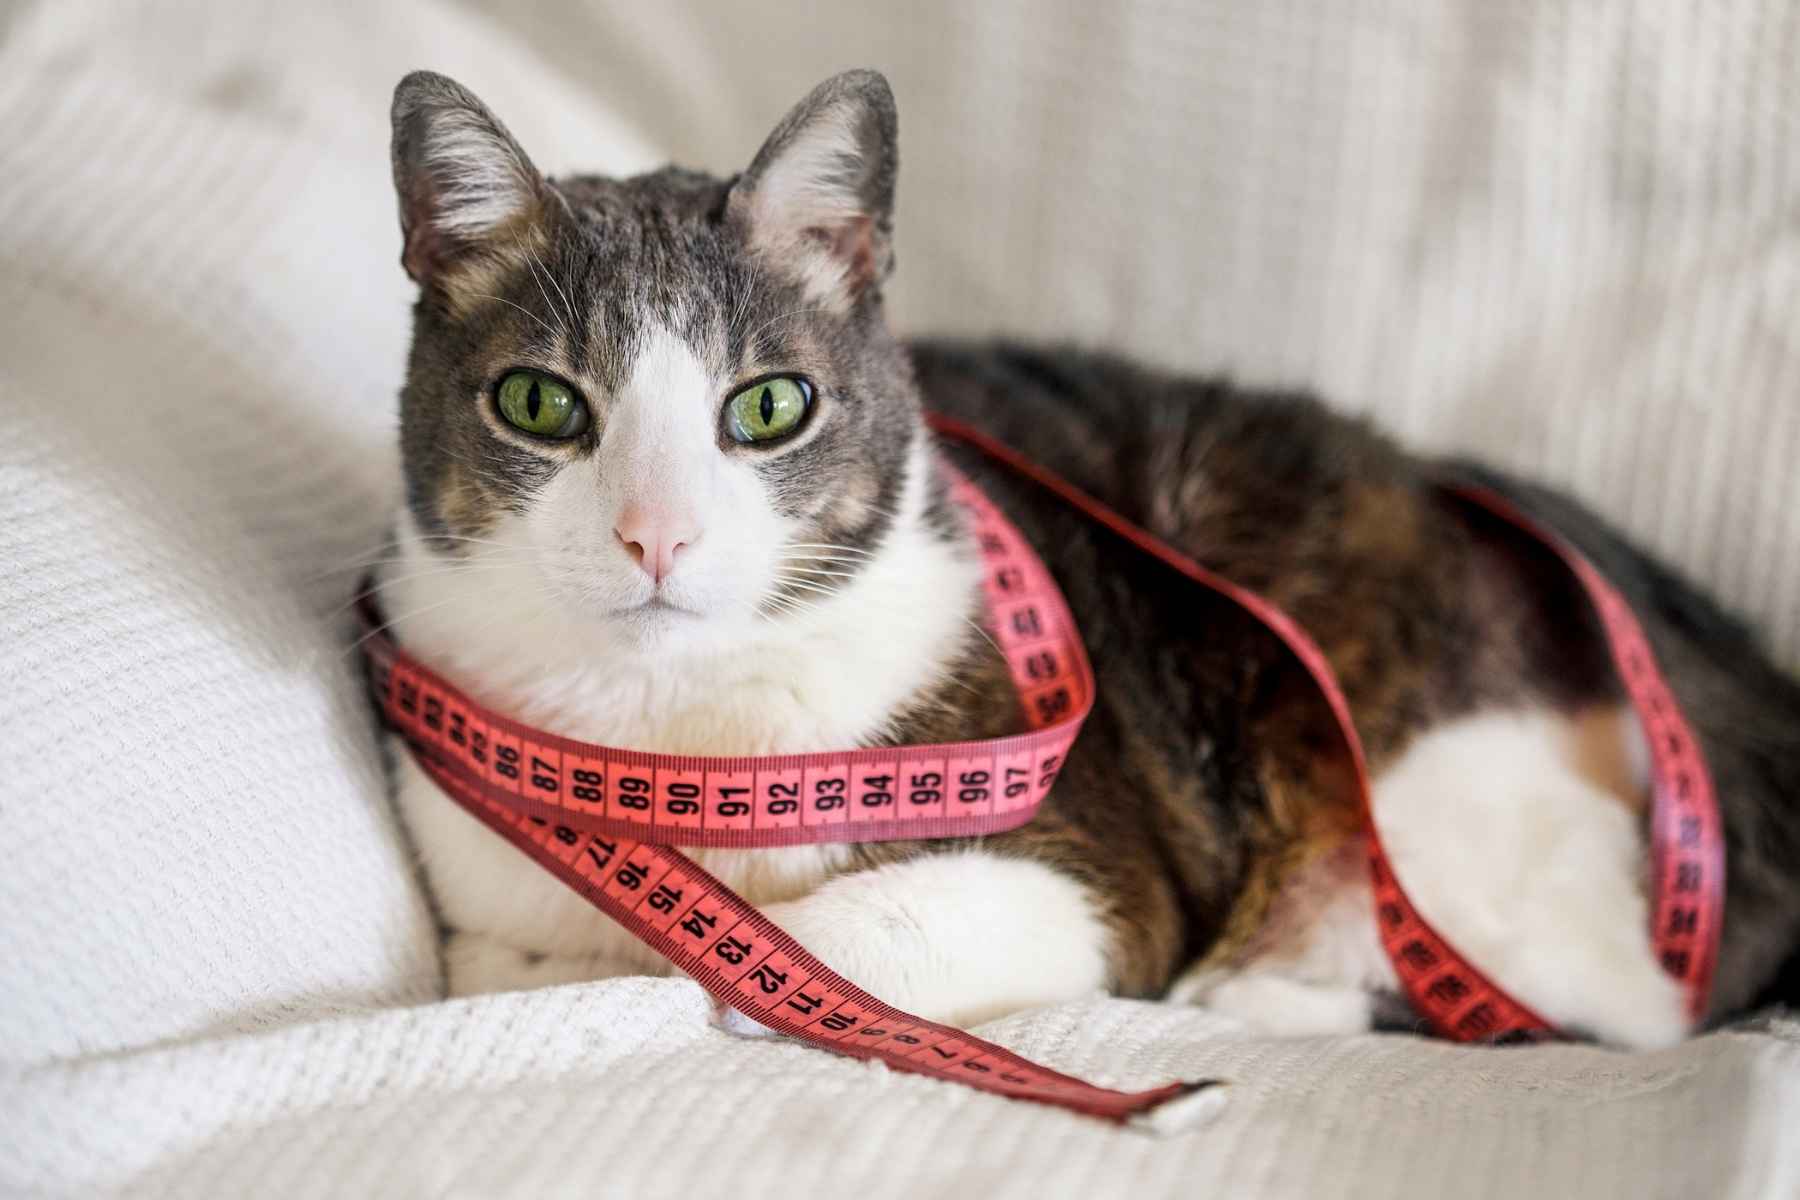 A cat with a measuring tape round its neck and body